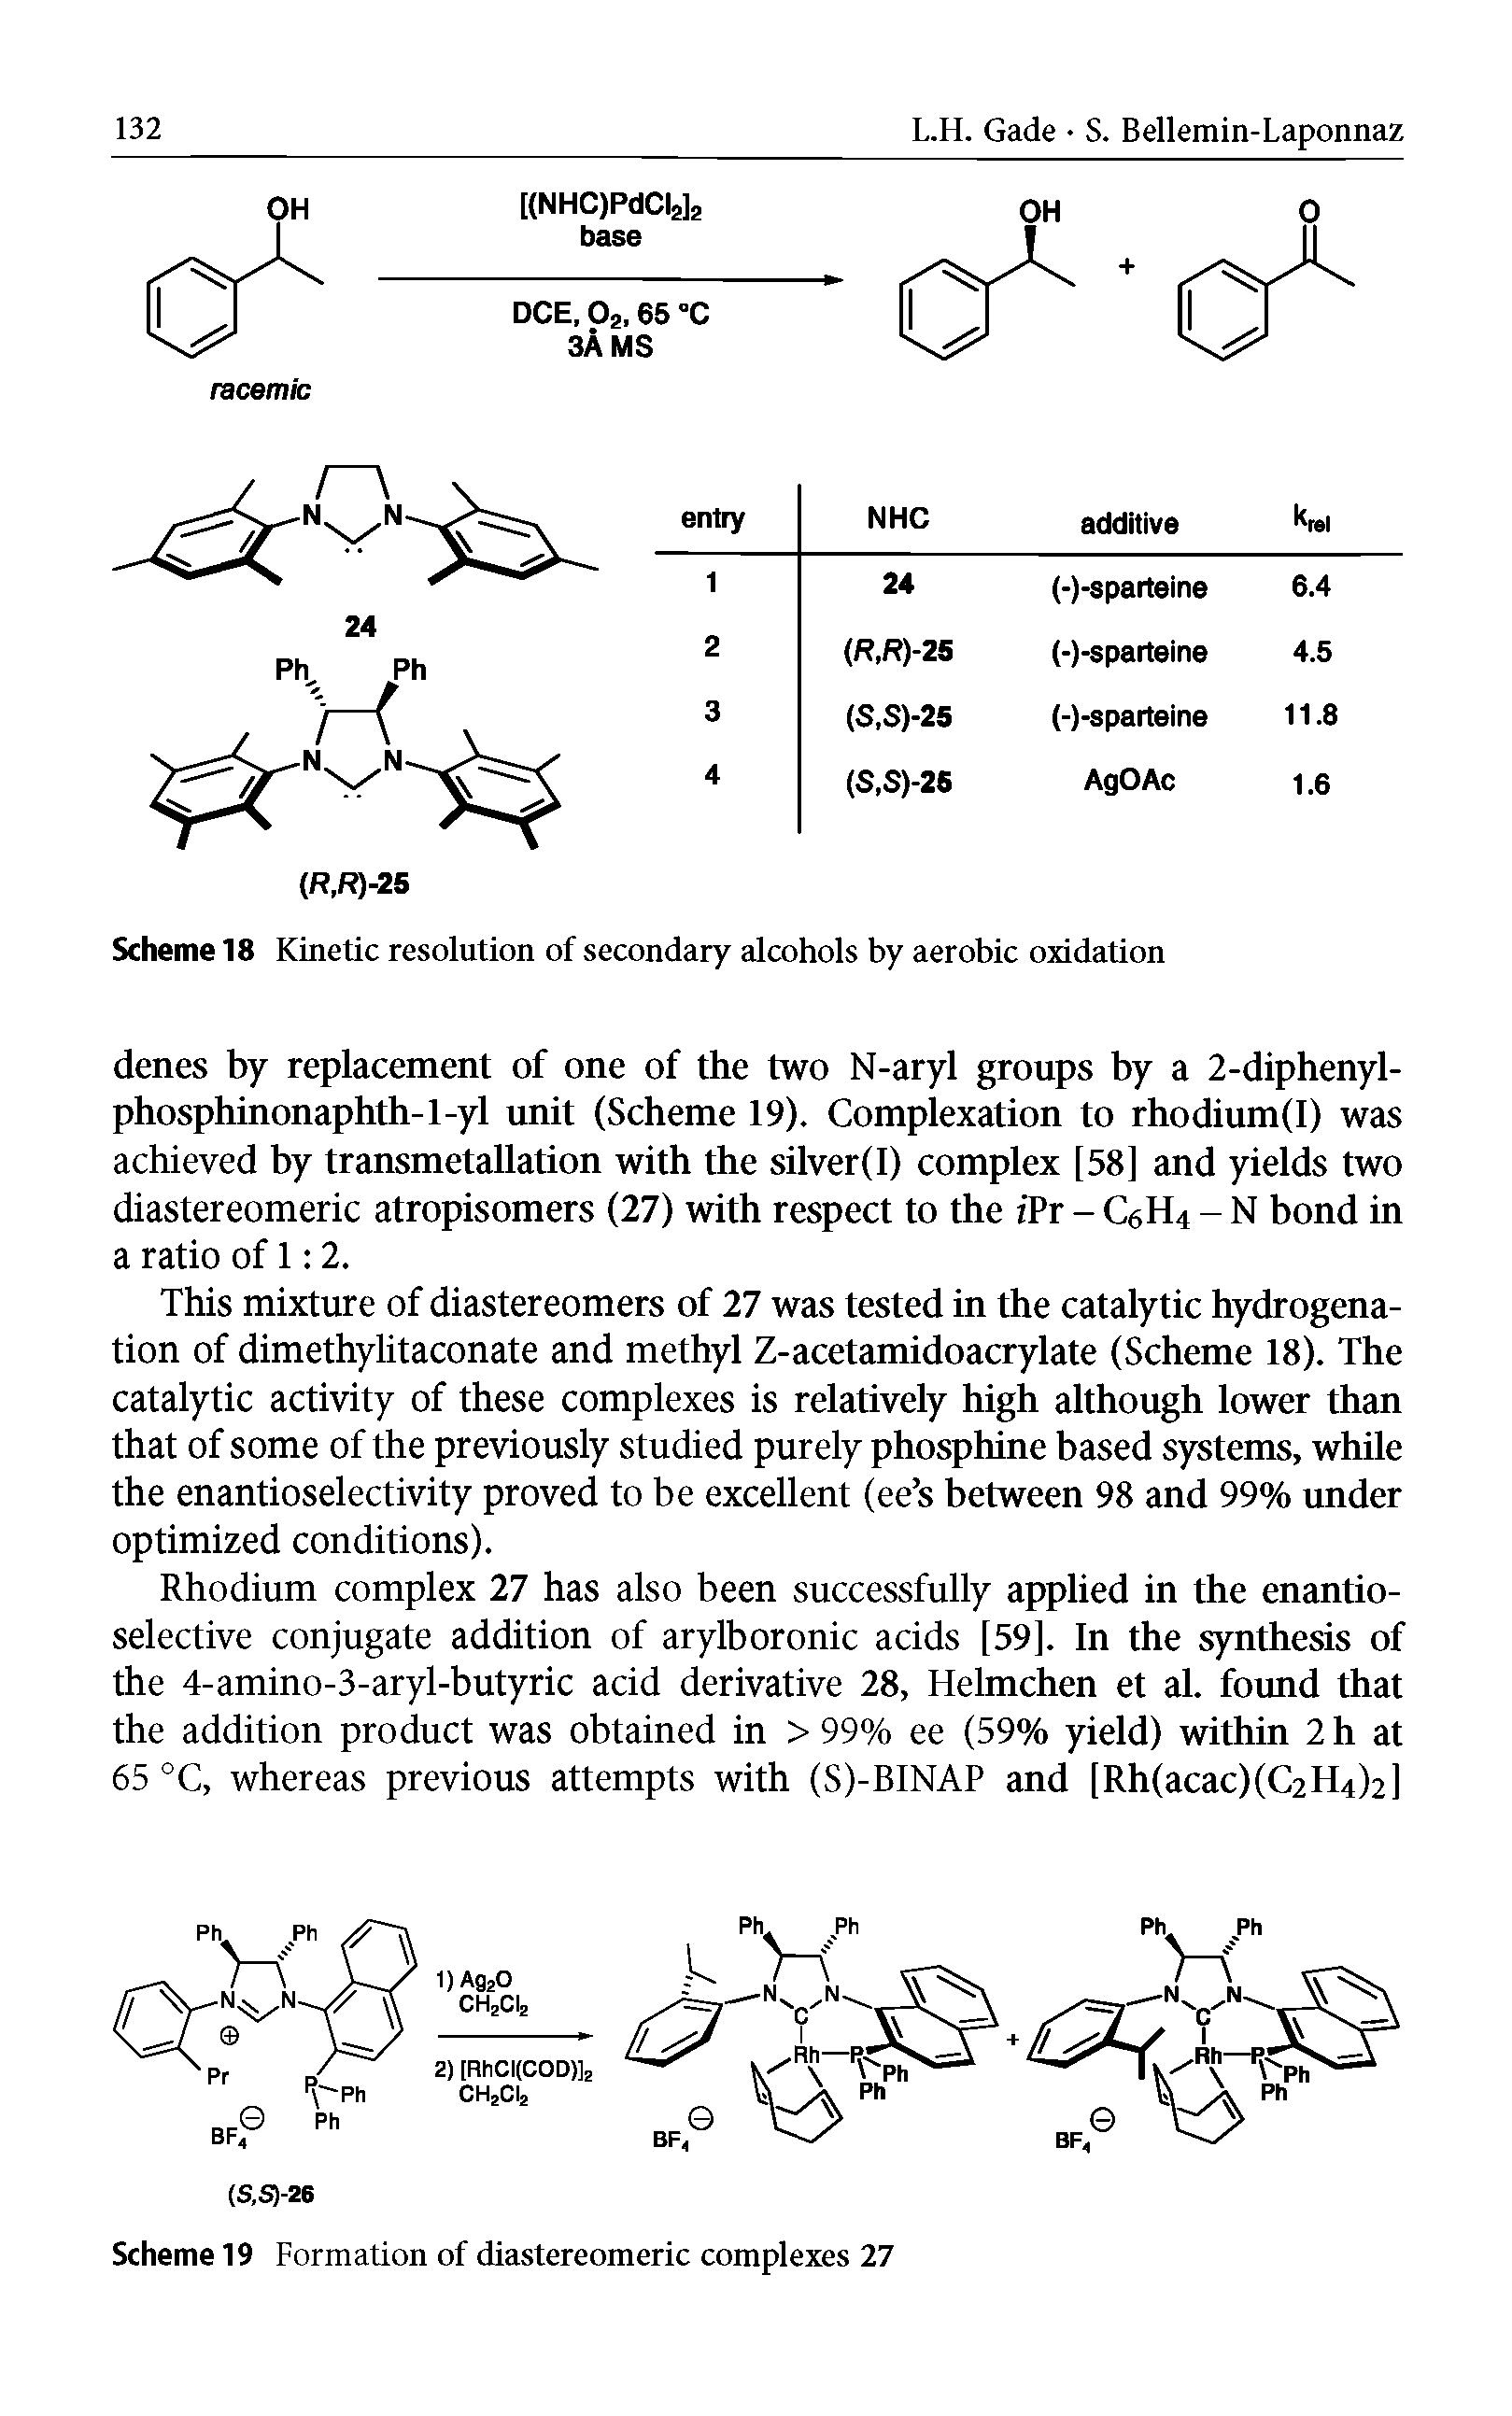 Scheme 18 Kinetic resolution of secondary alcohols by aerobic oxidation...